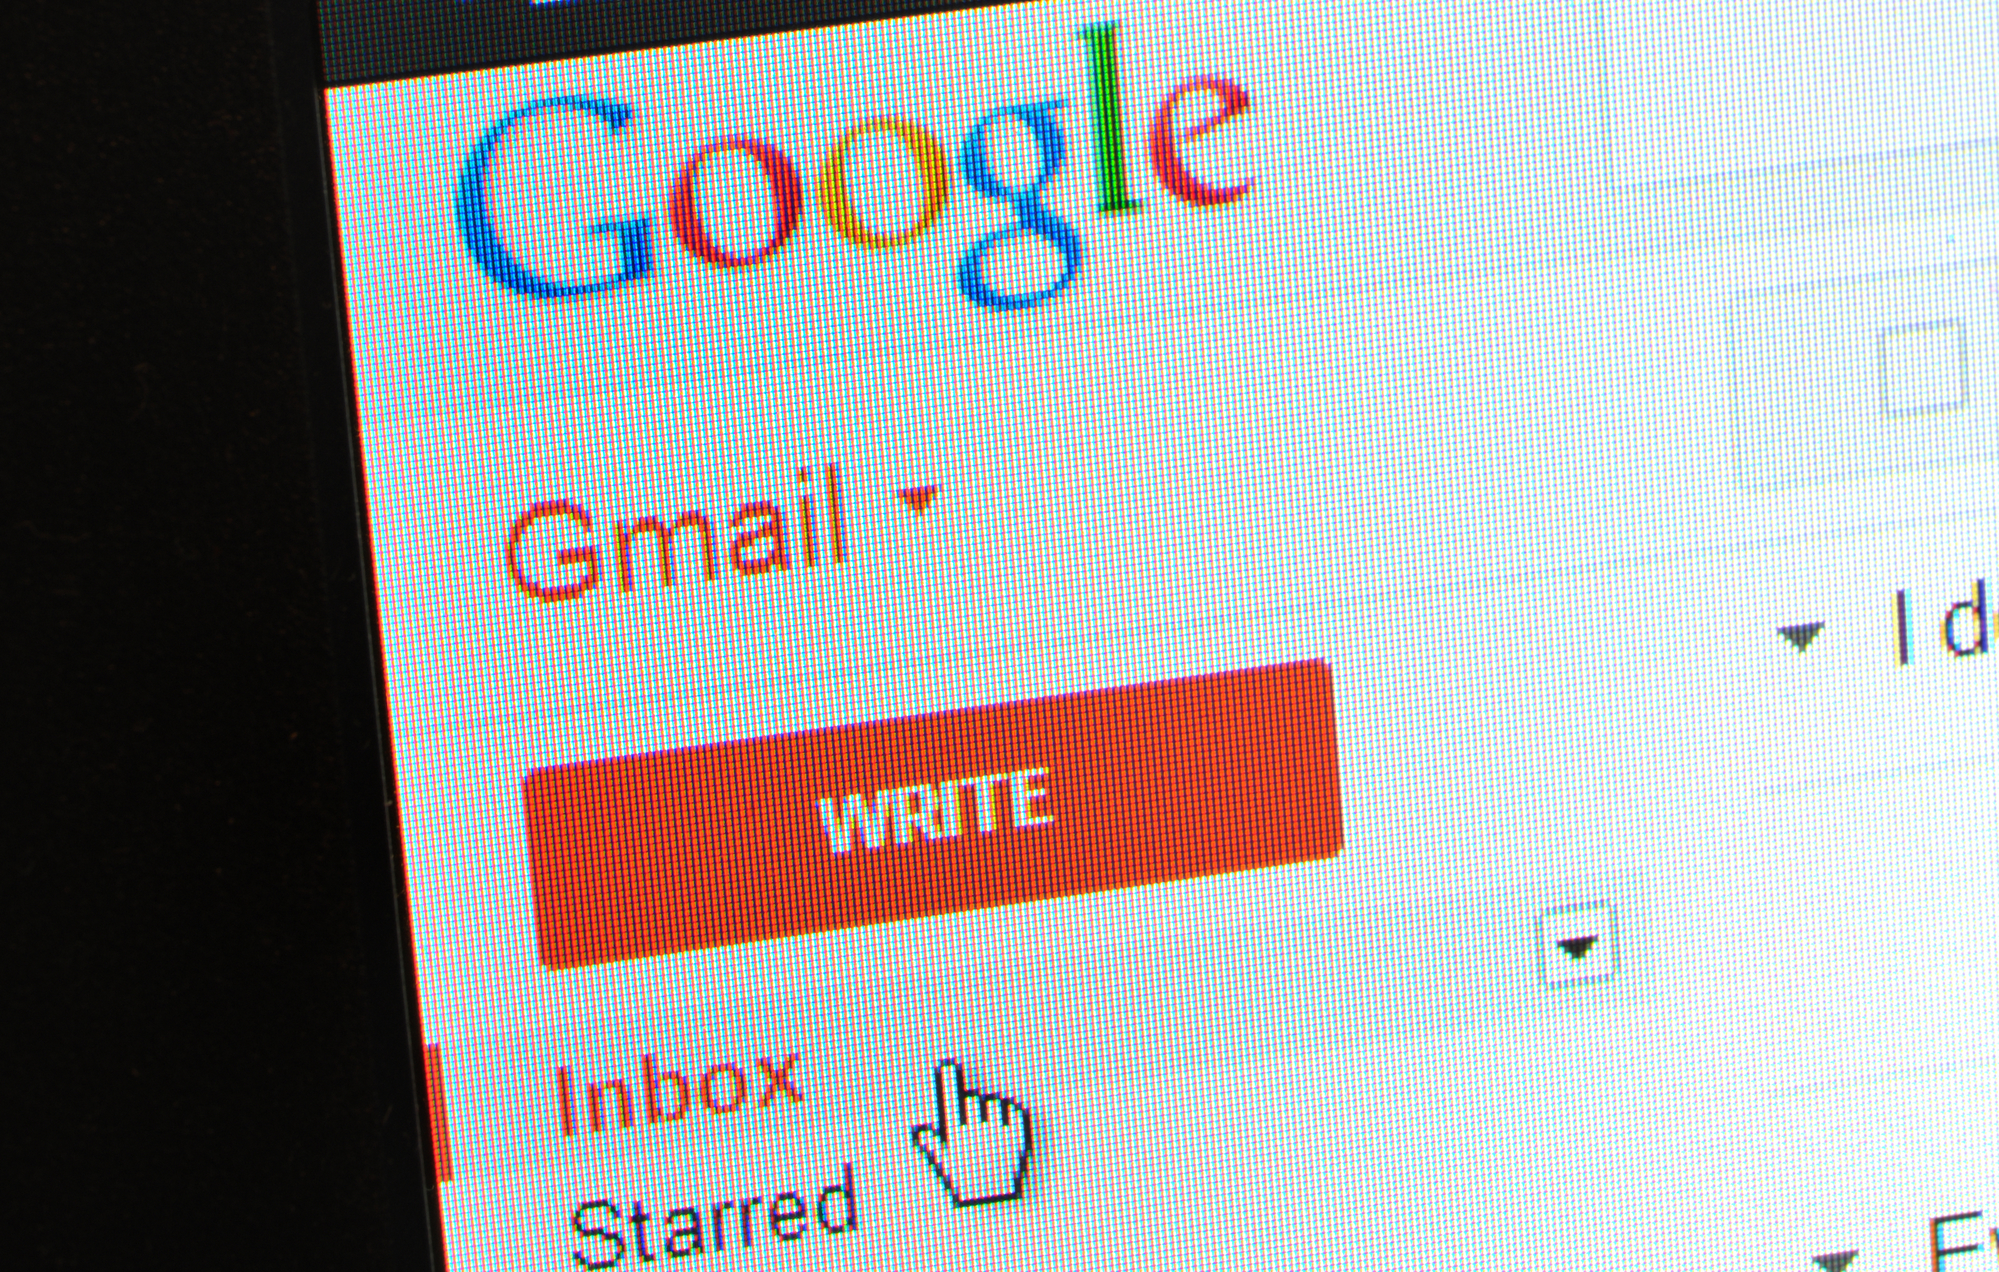 Estate Litigation: What happens to your Gmail account when you die?